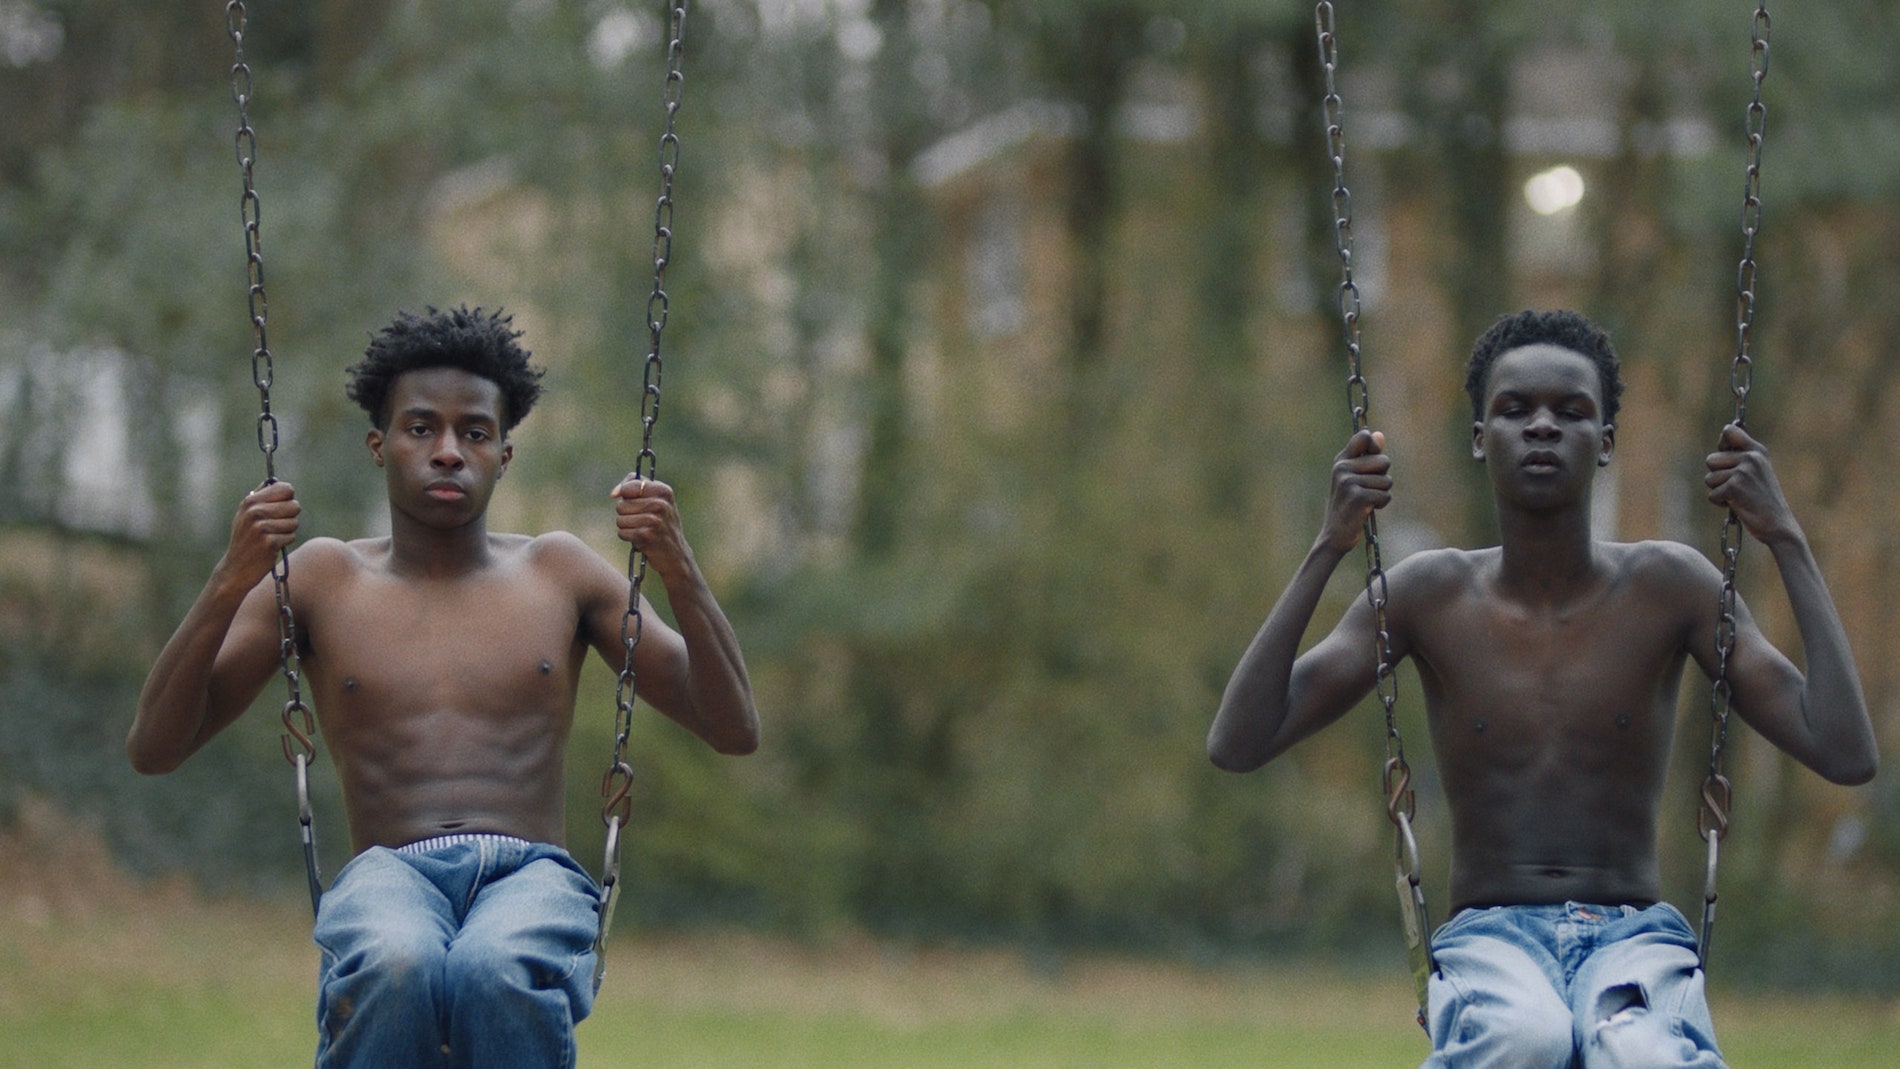 Two black teenage boys sit side by side on swings facing the camera, shirtless, wearing blue jeans.